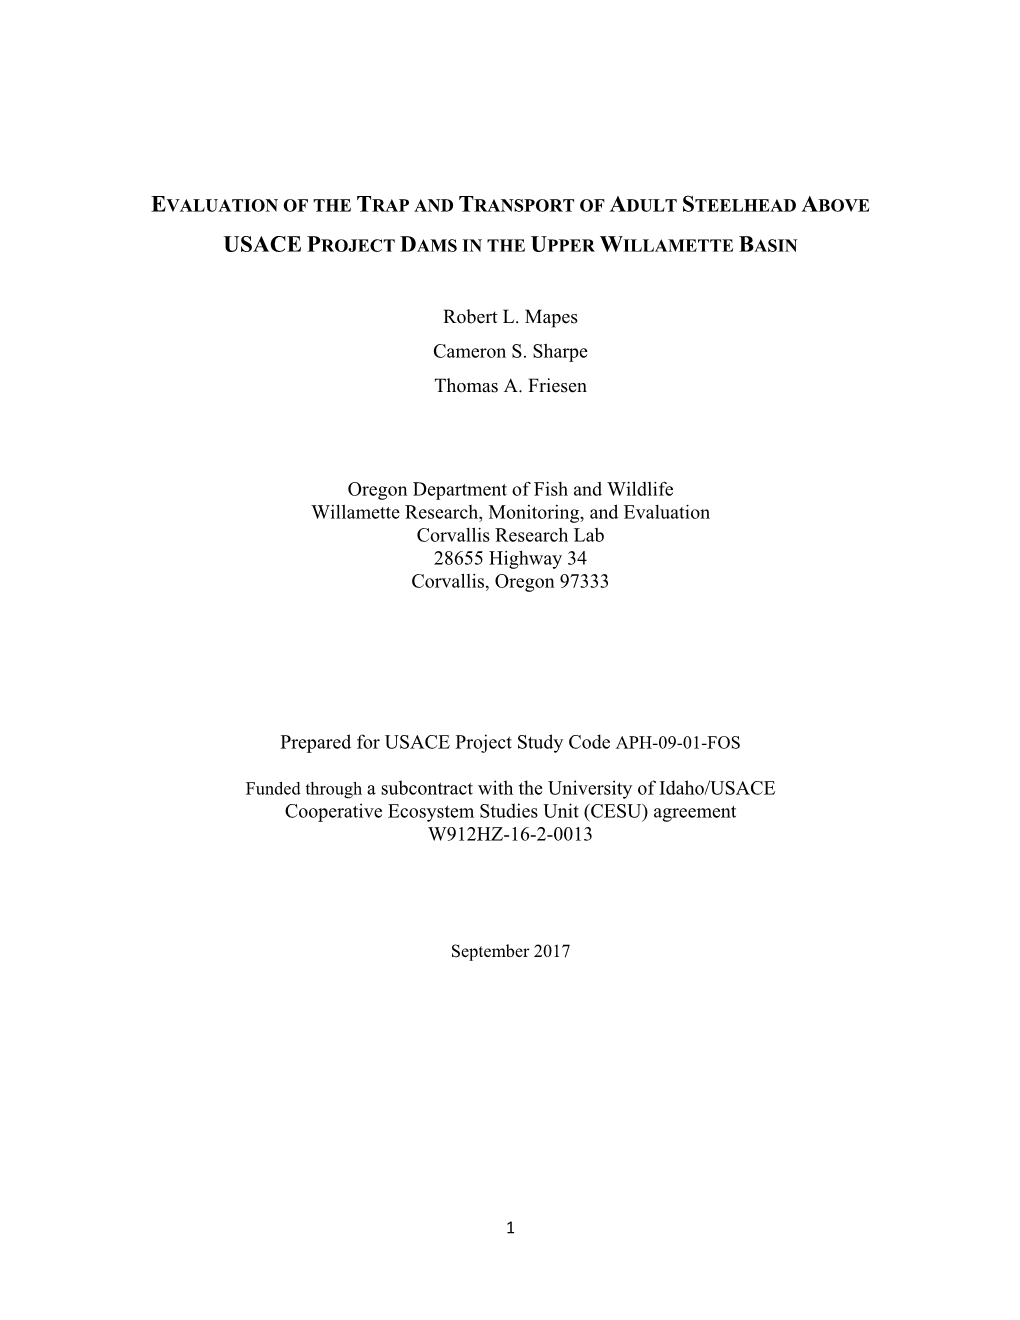 Evaluation of the Trap and Transport of Adult Steelhead Above